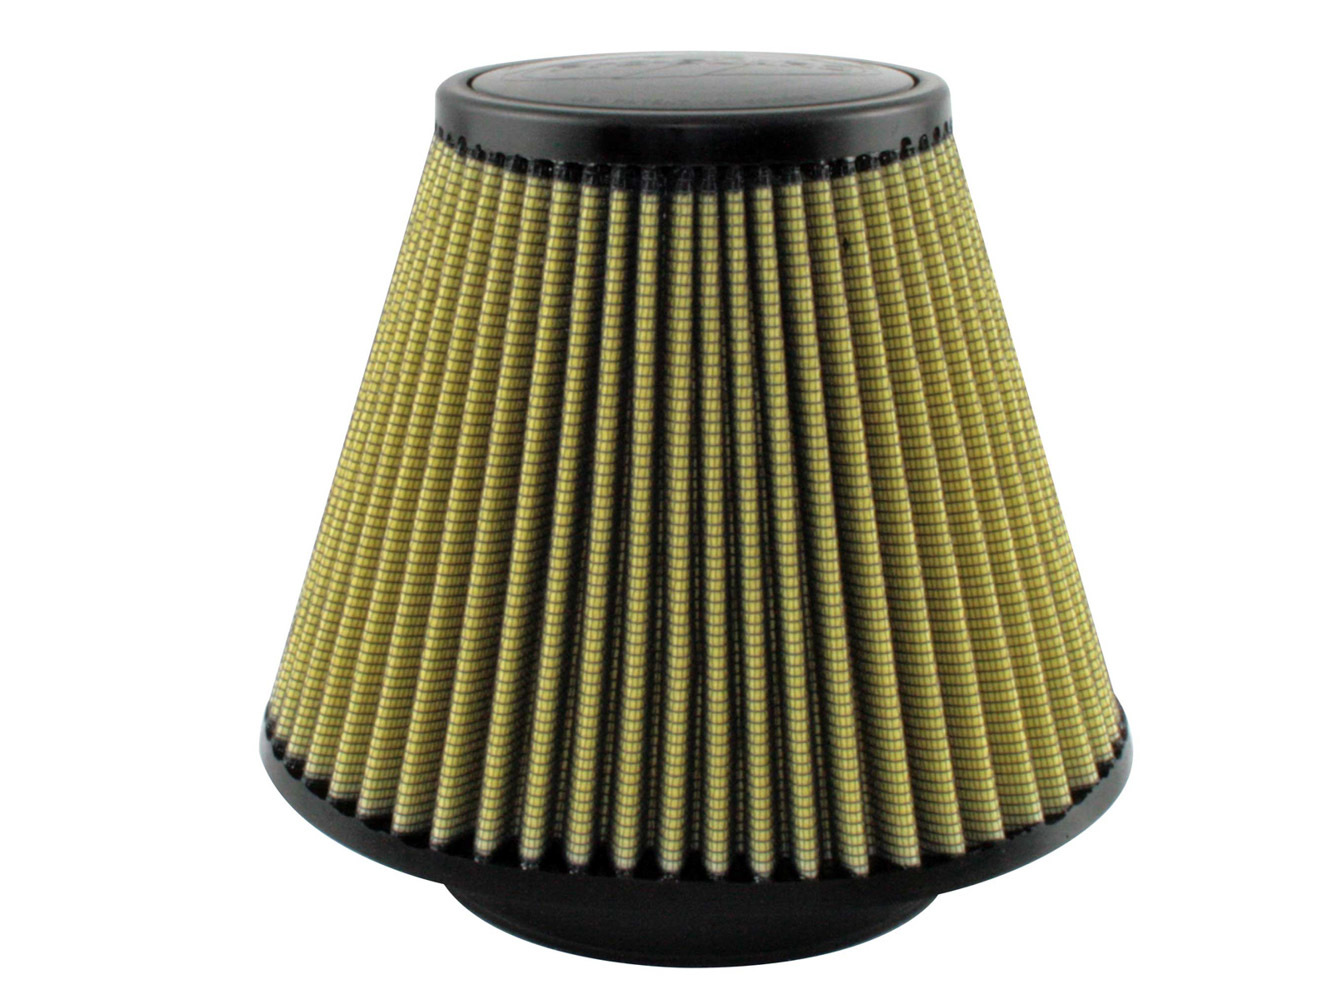 AFE Air Filter Magnum FLOW Pro GUARD7, Clamp-On, Conical, Yellow, Universal, Eac